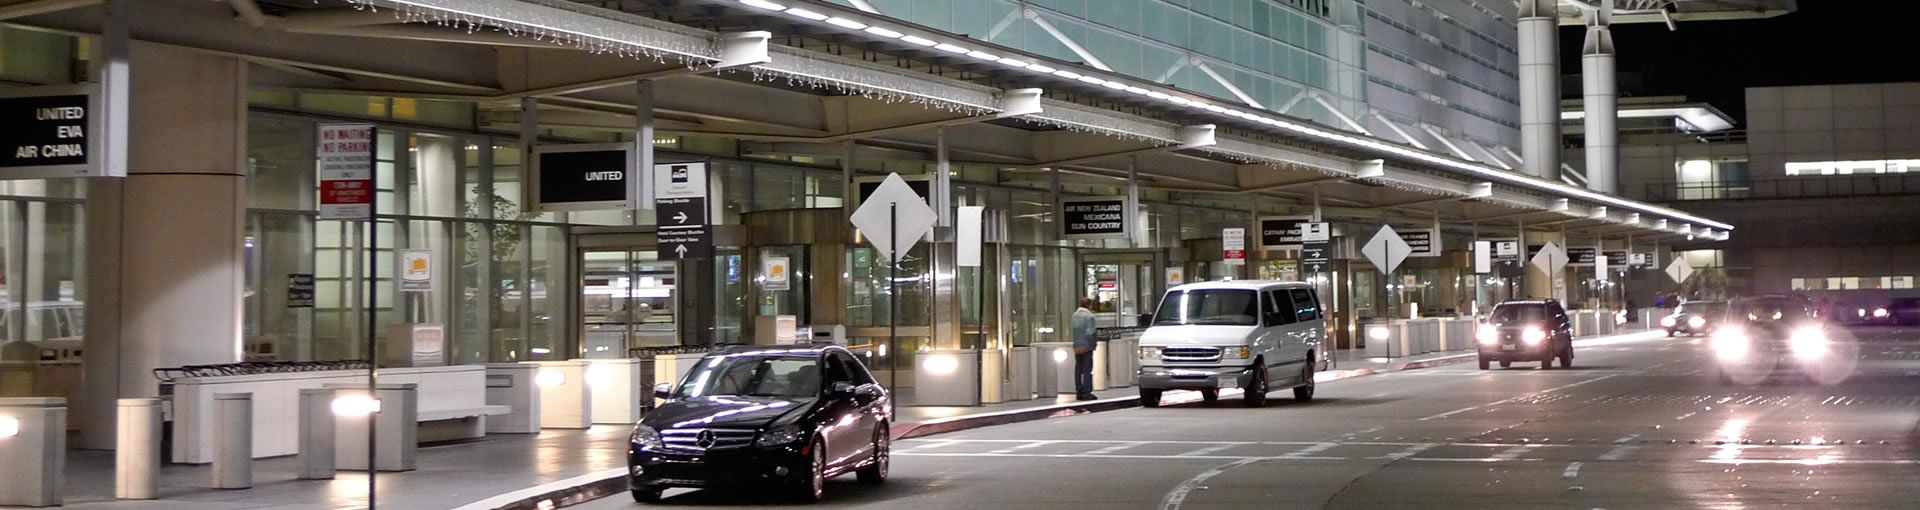 Airport Transportation San Francisco Airport Transfer & Shuttle Services